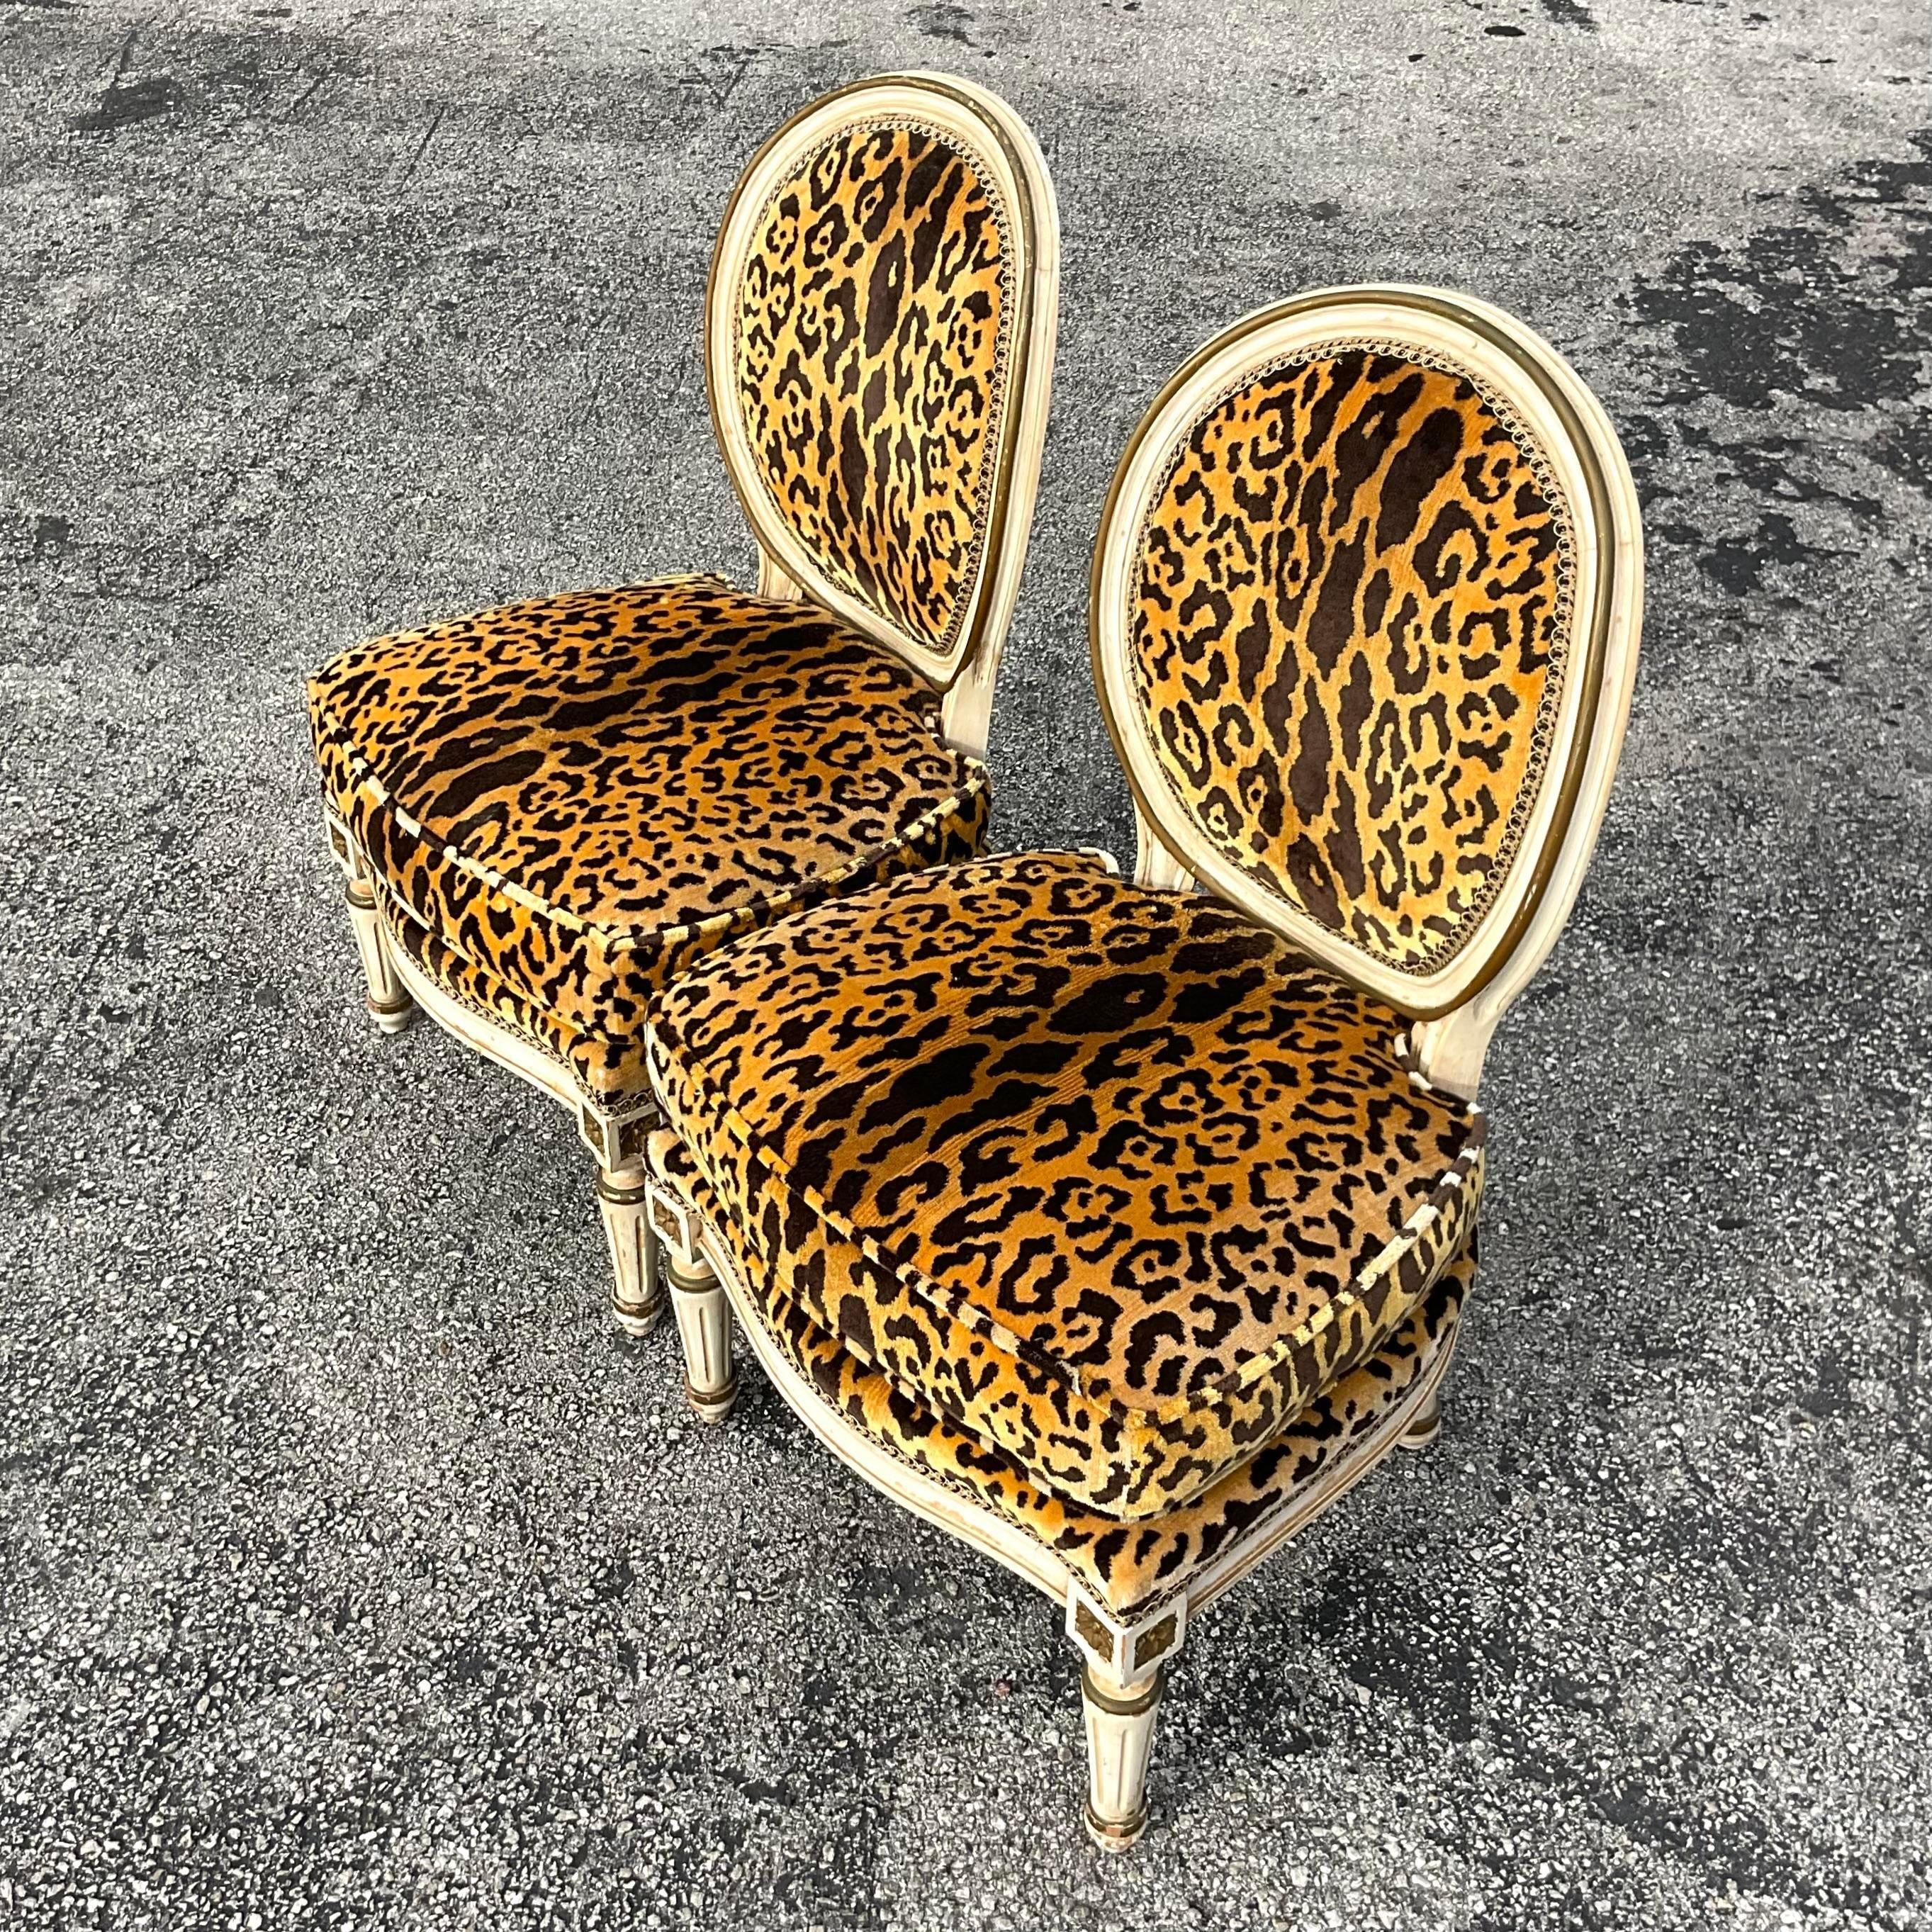 A stunning pair of vintage Regency slipper chairs. A chic Louis XI style with leopard velvet upholstery. Acquired from a Palm Beach estate.